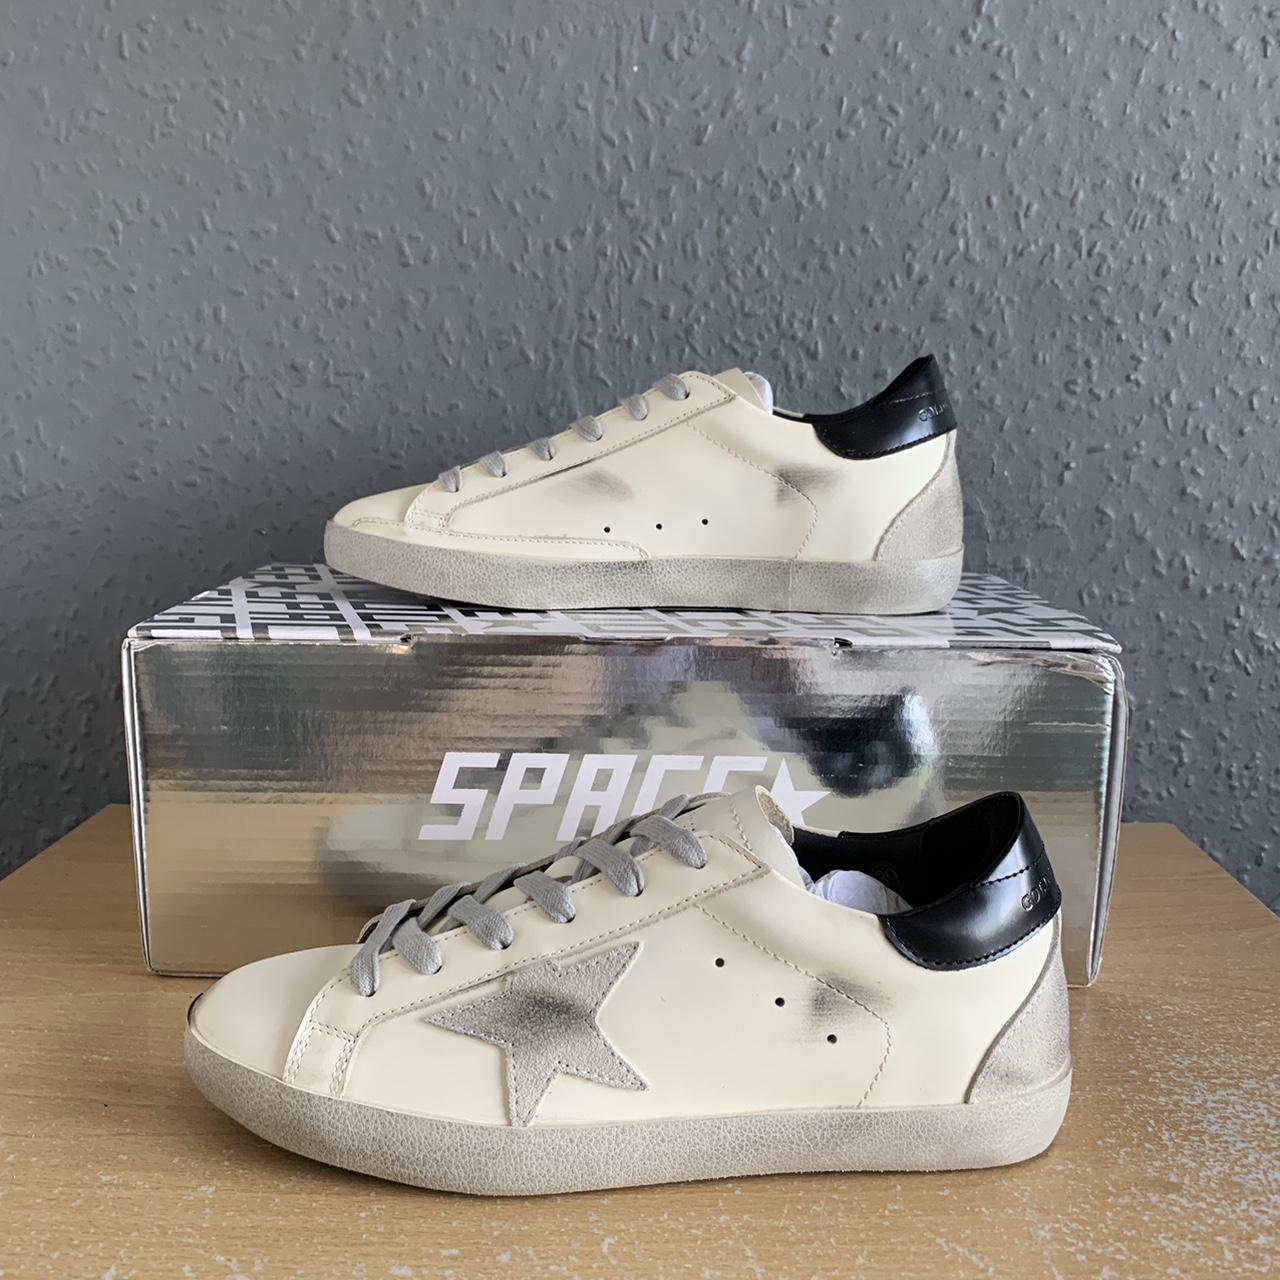 GOLDEN GOOSE - SNEAKERS YEAH COL A1 COLORWAY: WHITE... - Depop